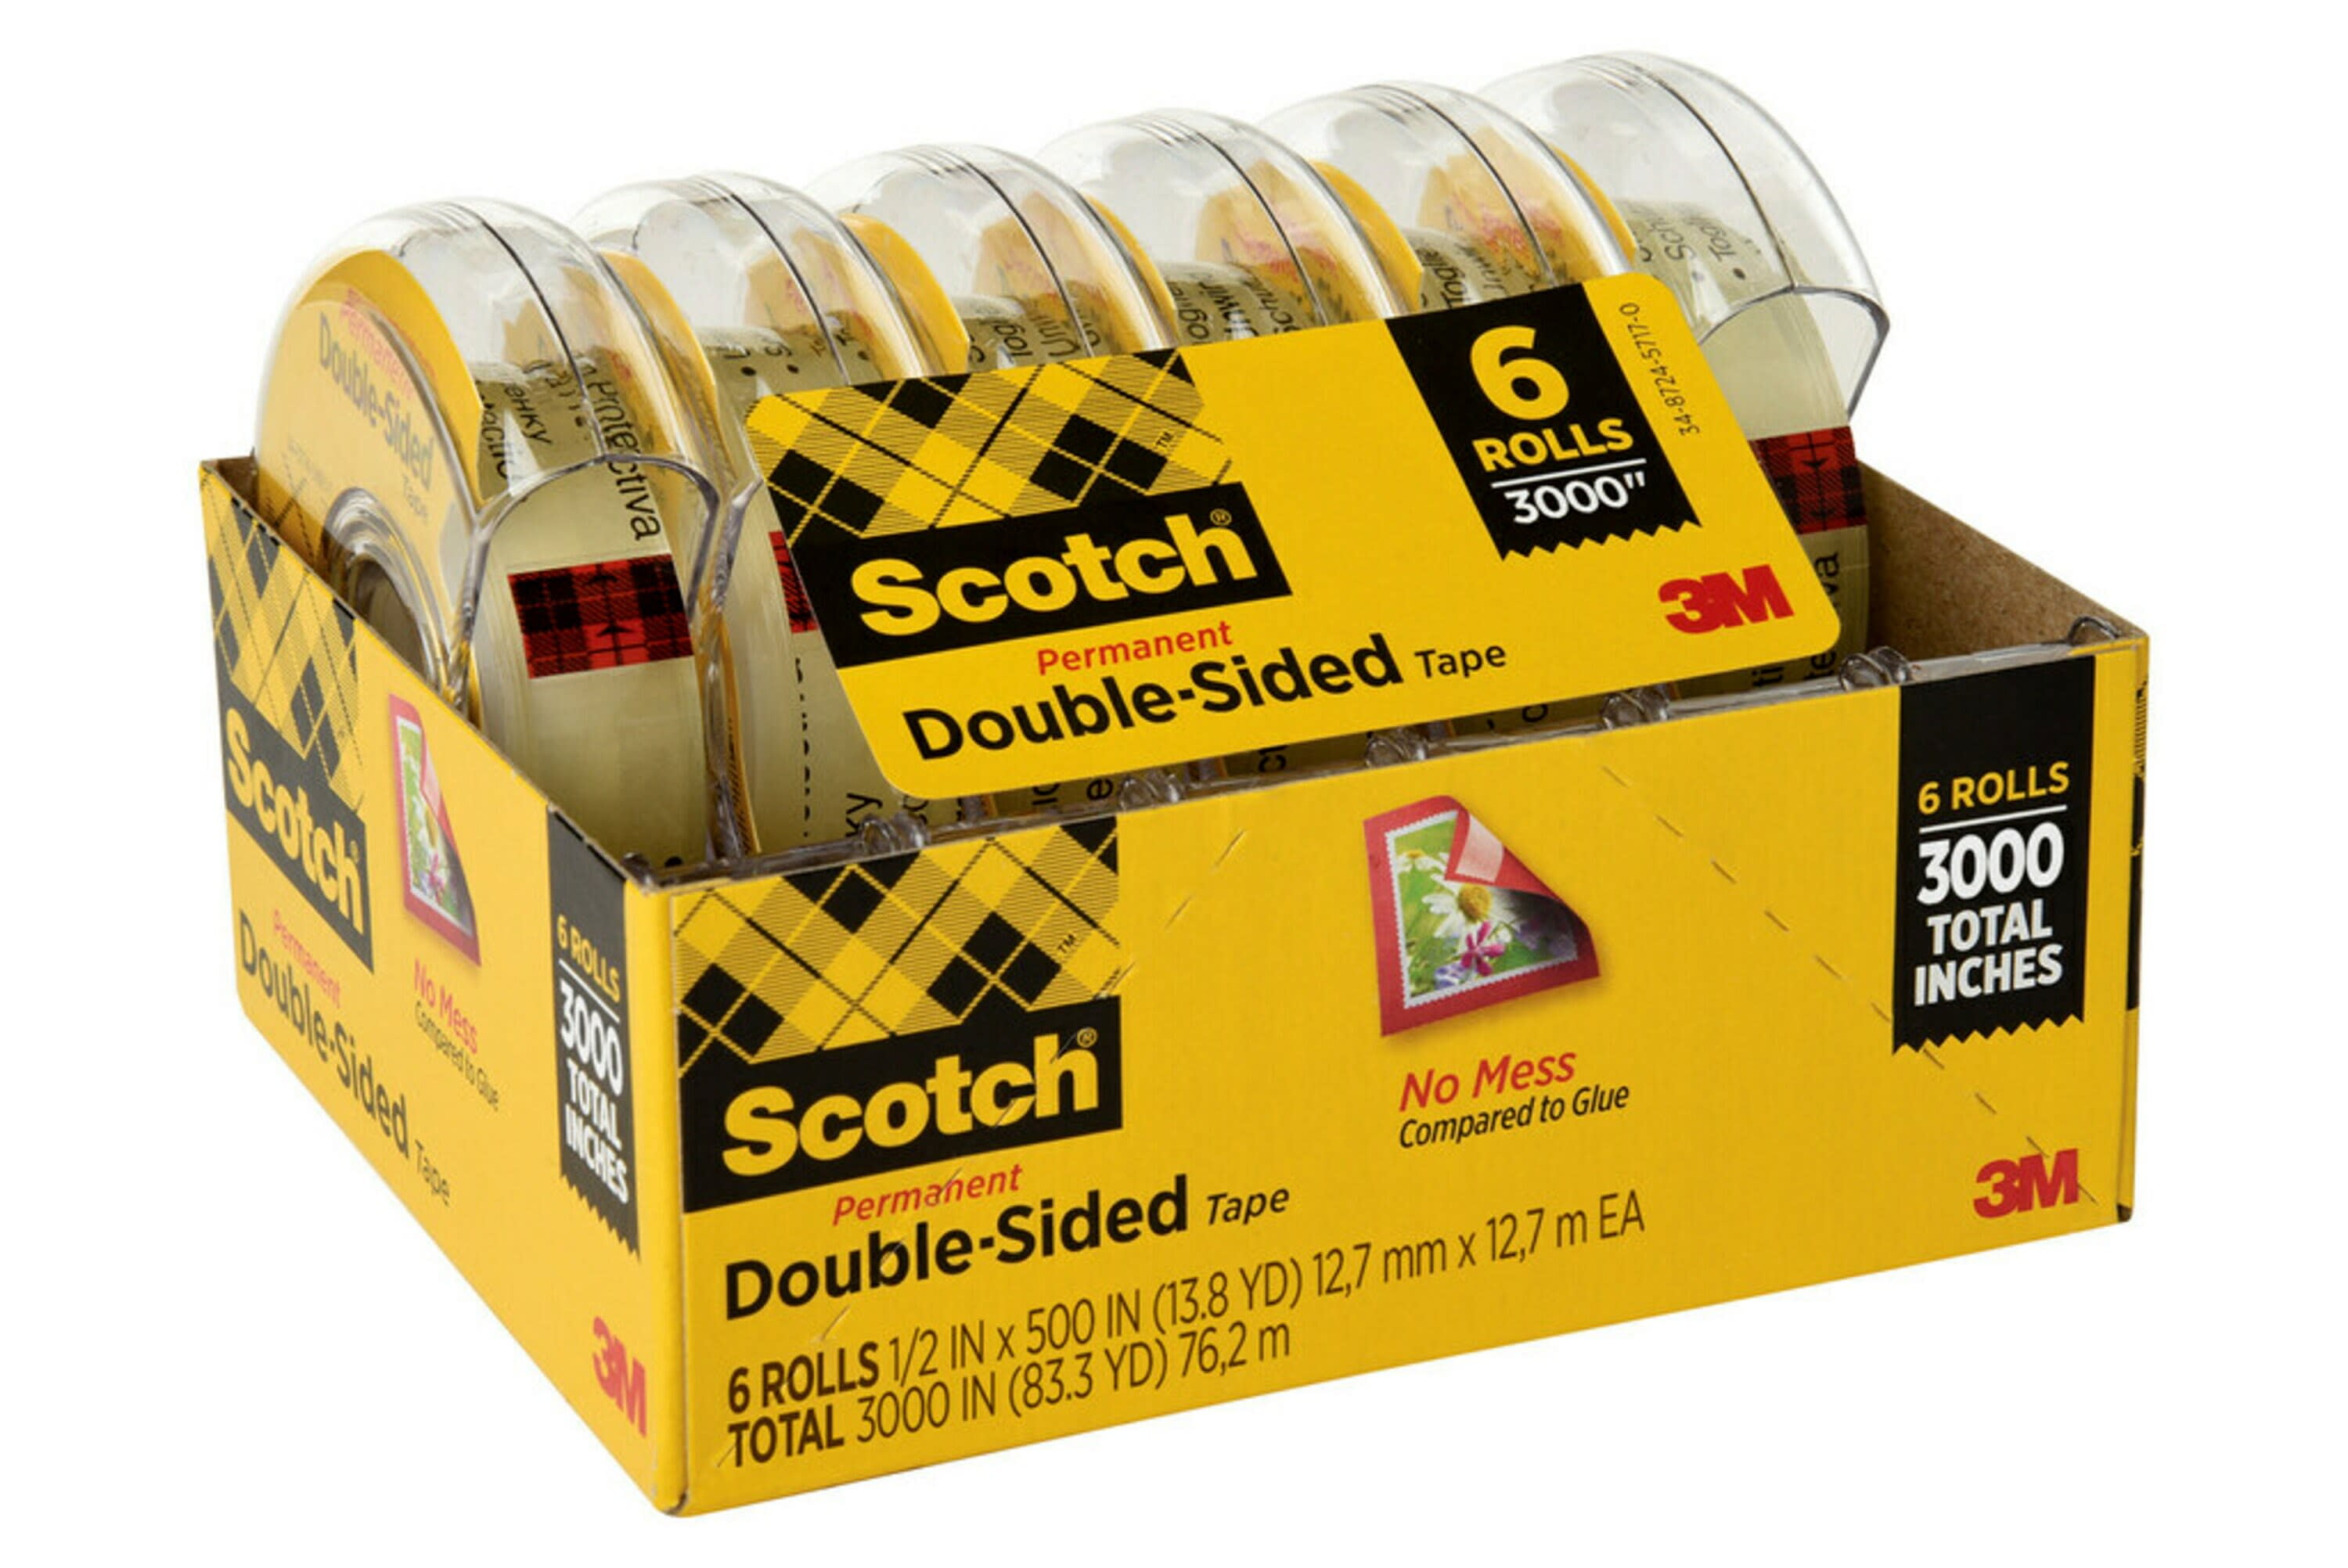 Scotch Permanent Double-Sided Tape .5 x 450